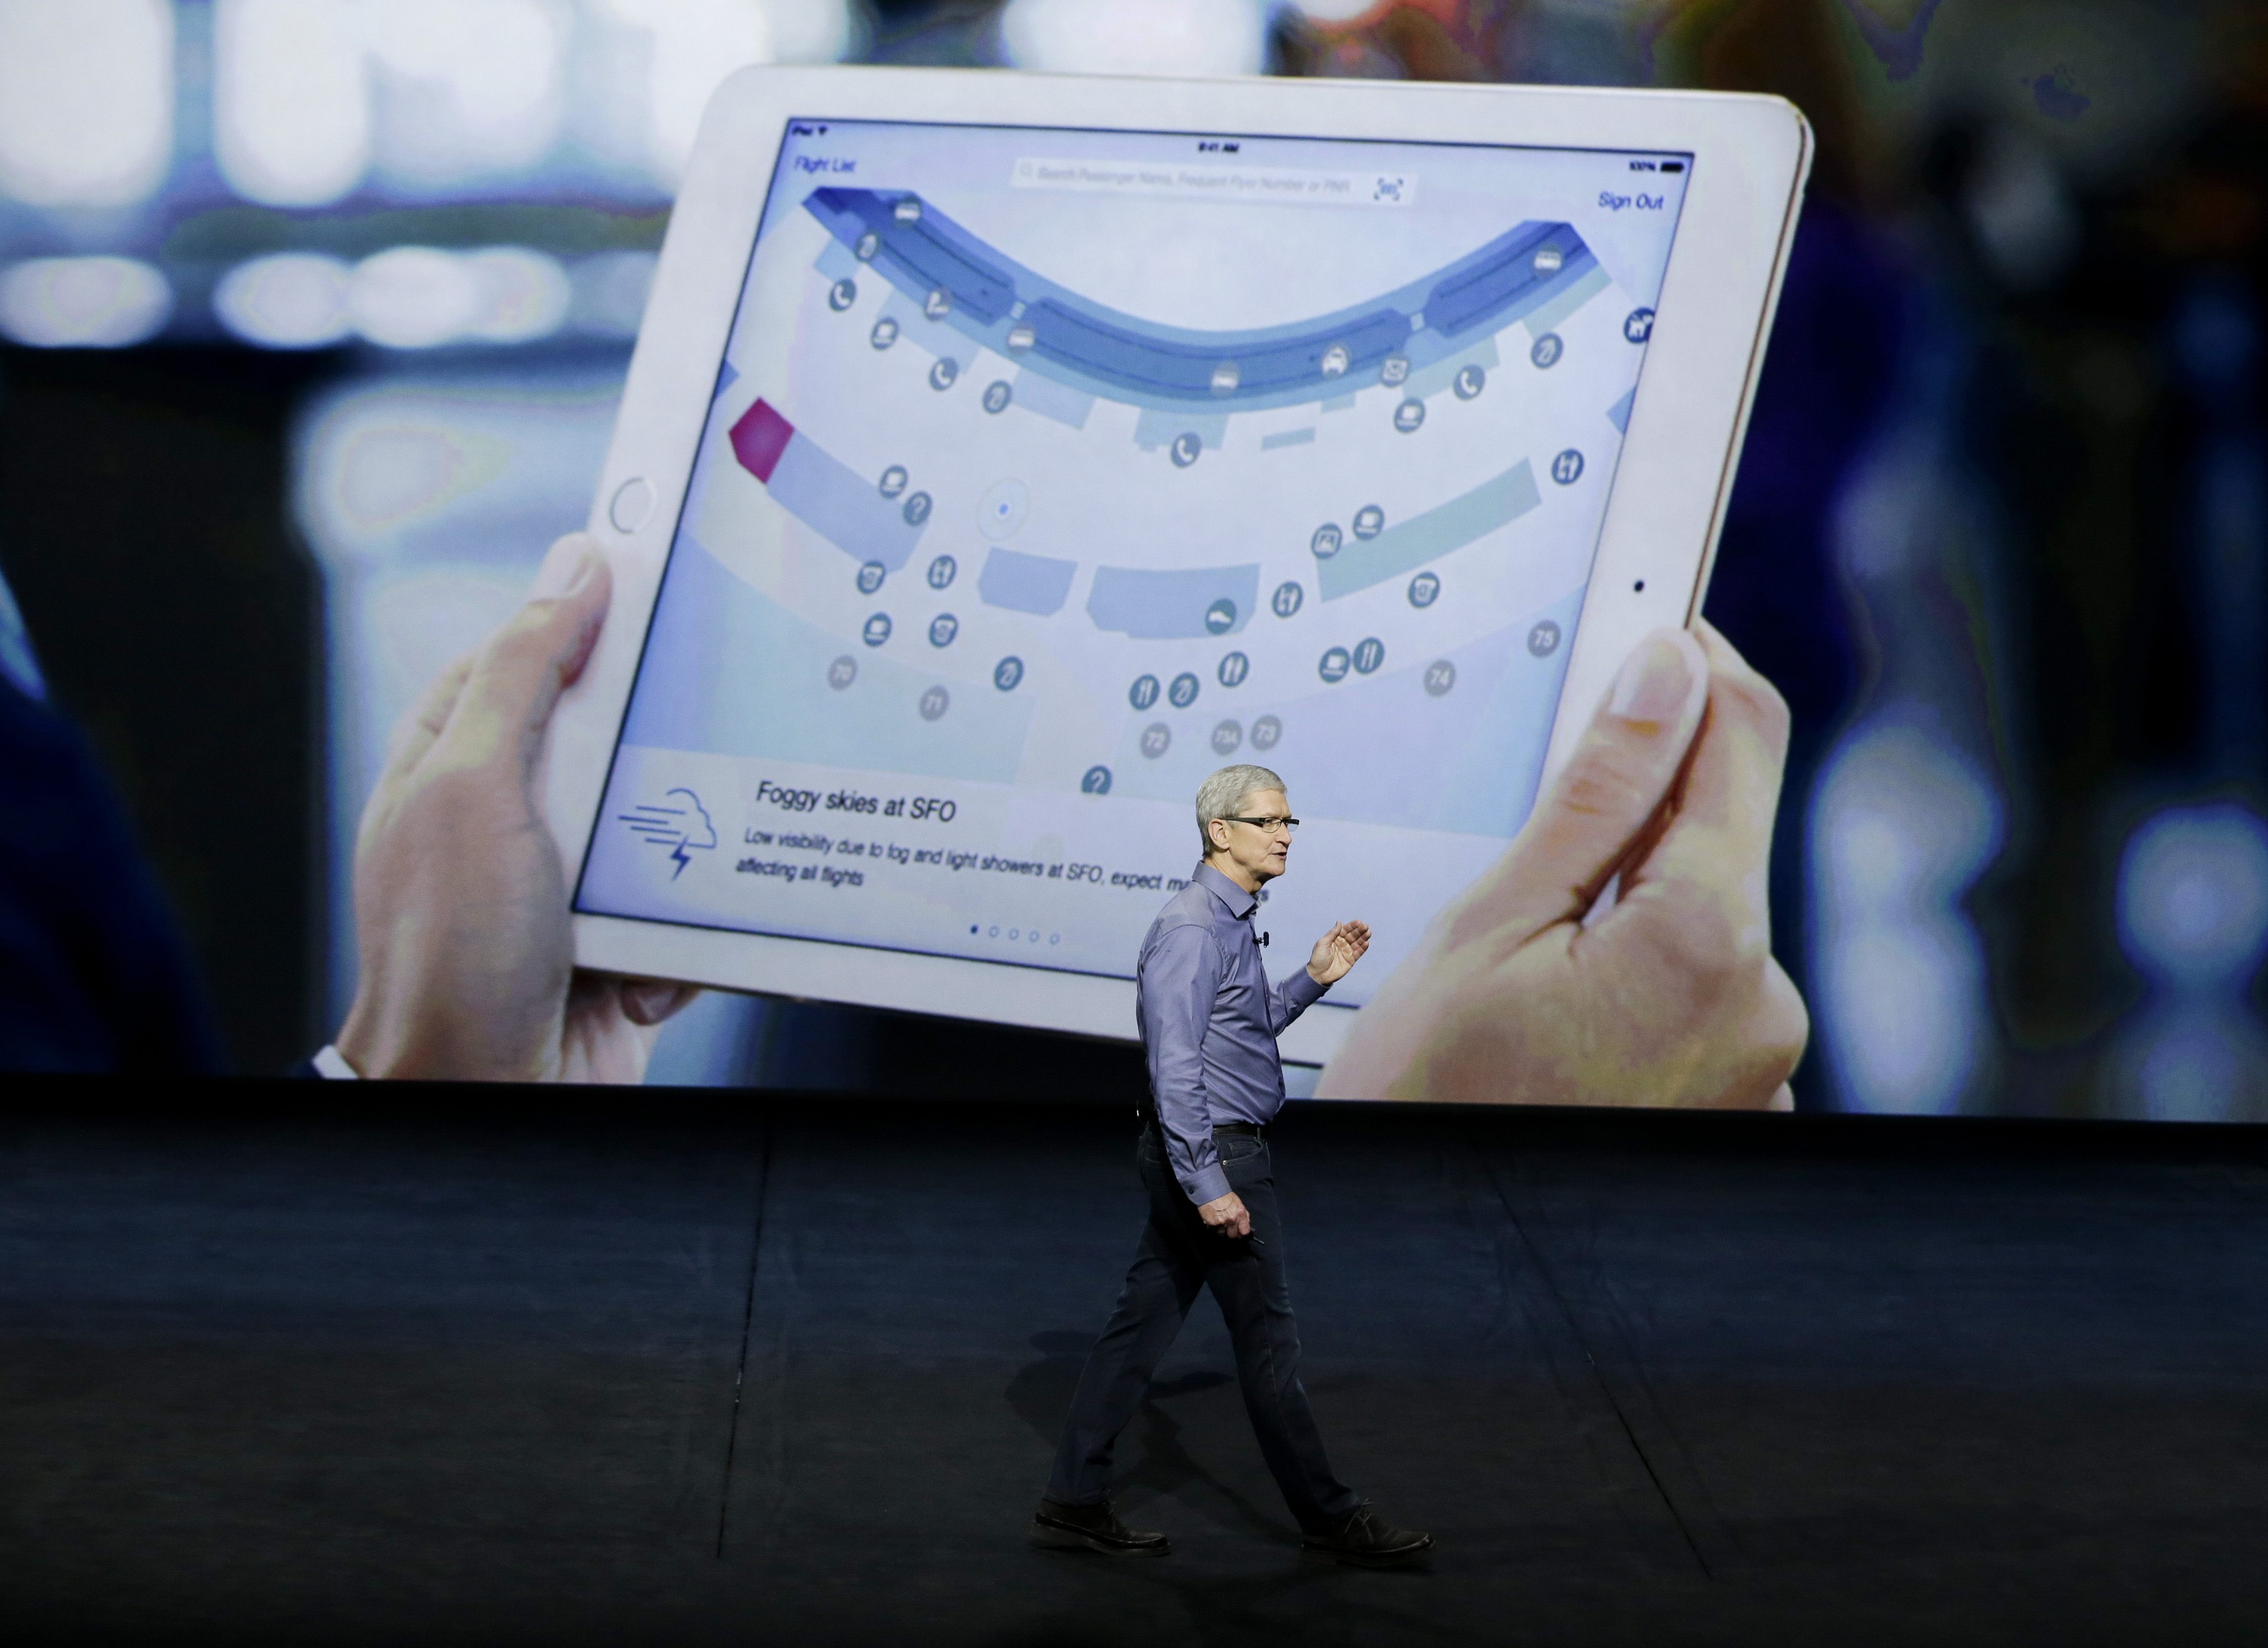 Apple CEO Tim Cook discusses the new iPad during the Apple event at the Bill Graham Civic Auditorium in San Francisco, Wednesday, Sept. 9, 2015. (AP Photo/Eric Risberg)